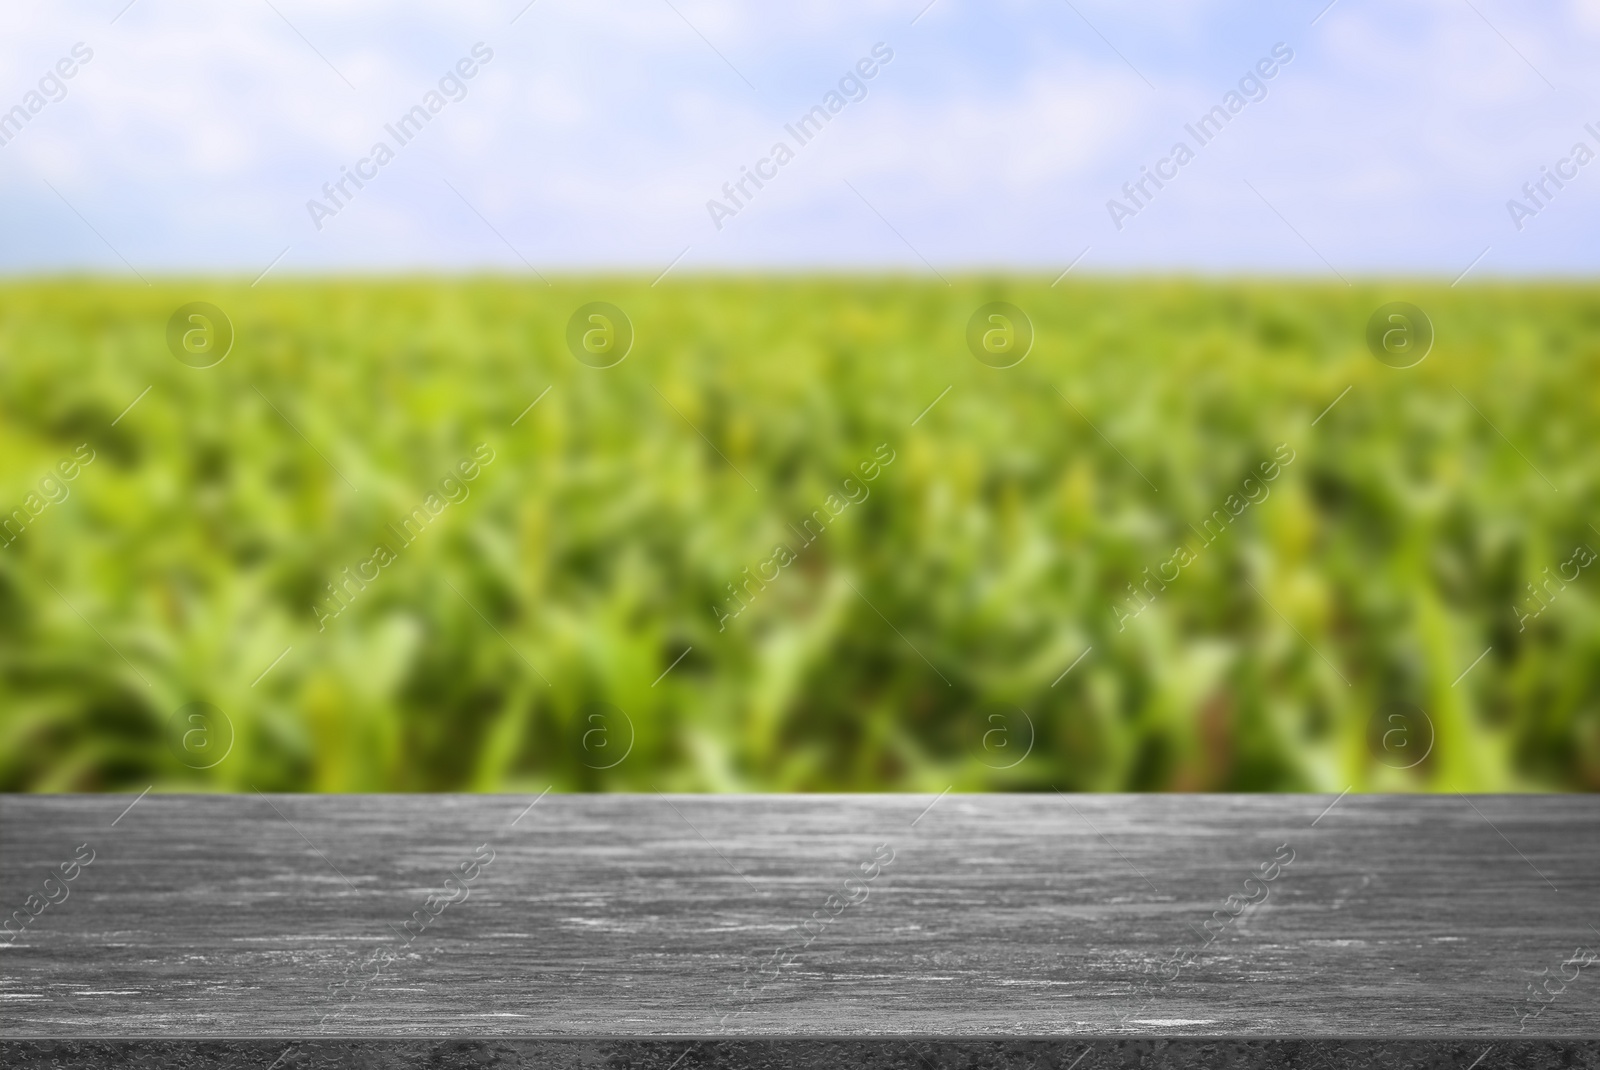 Image of Empty stone surface and blurred view of corn plants growing in field. Space for text